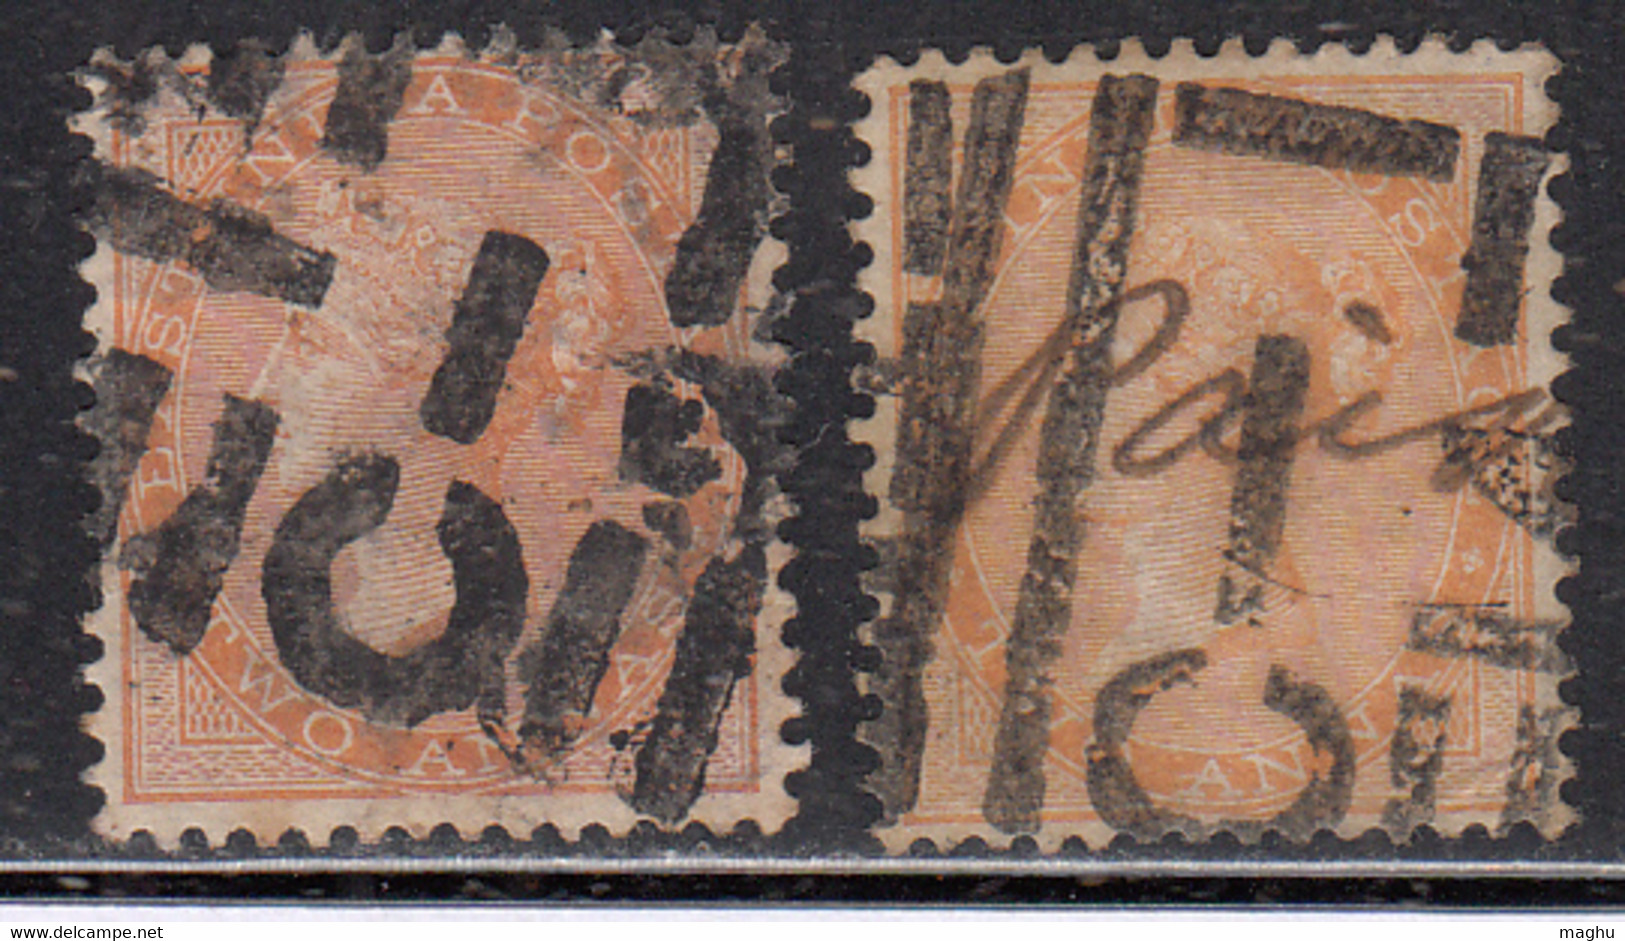 1856 British East India Used, Two Annas Shades, No Watermark - 1854 East India Company Administration